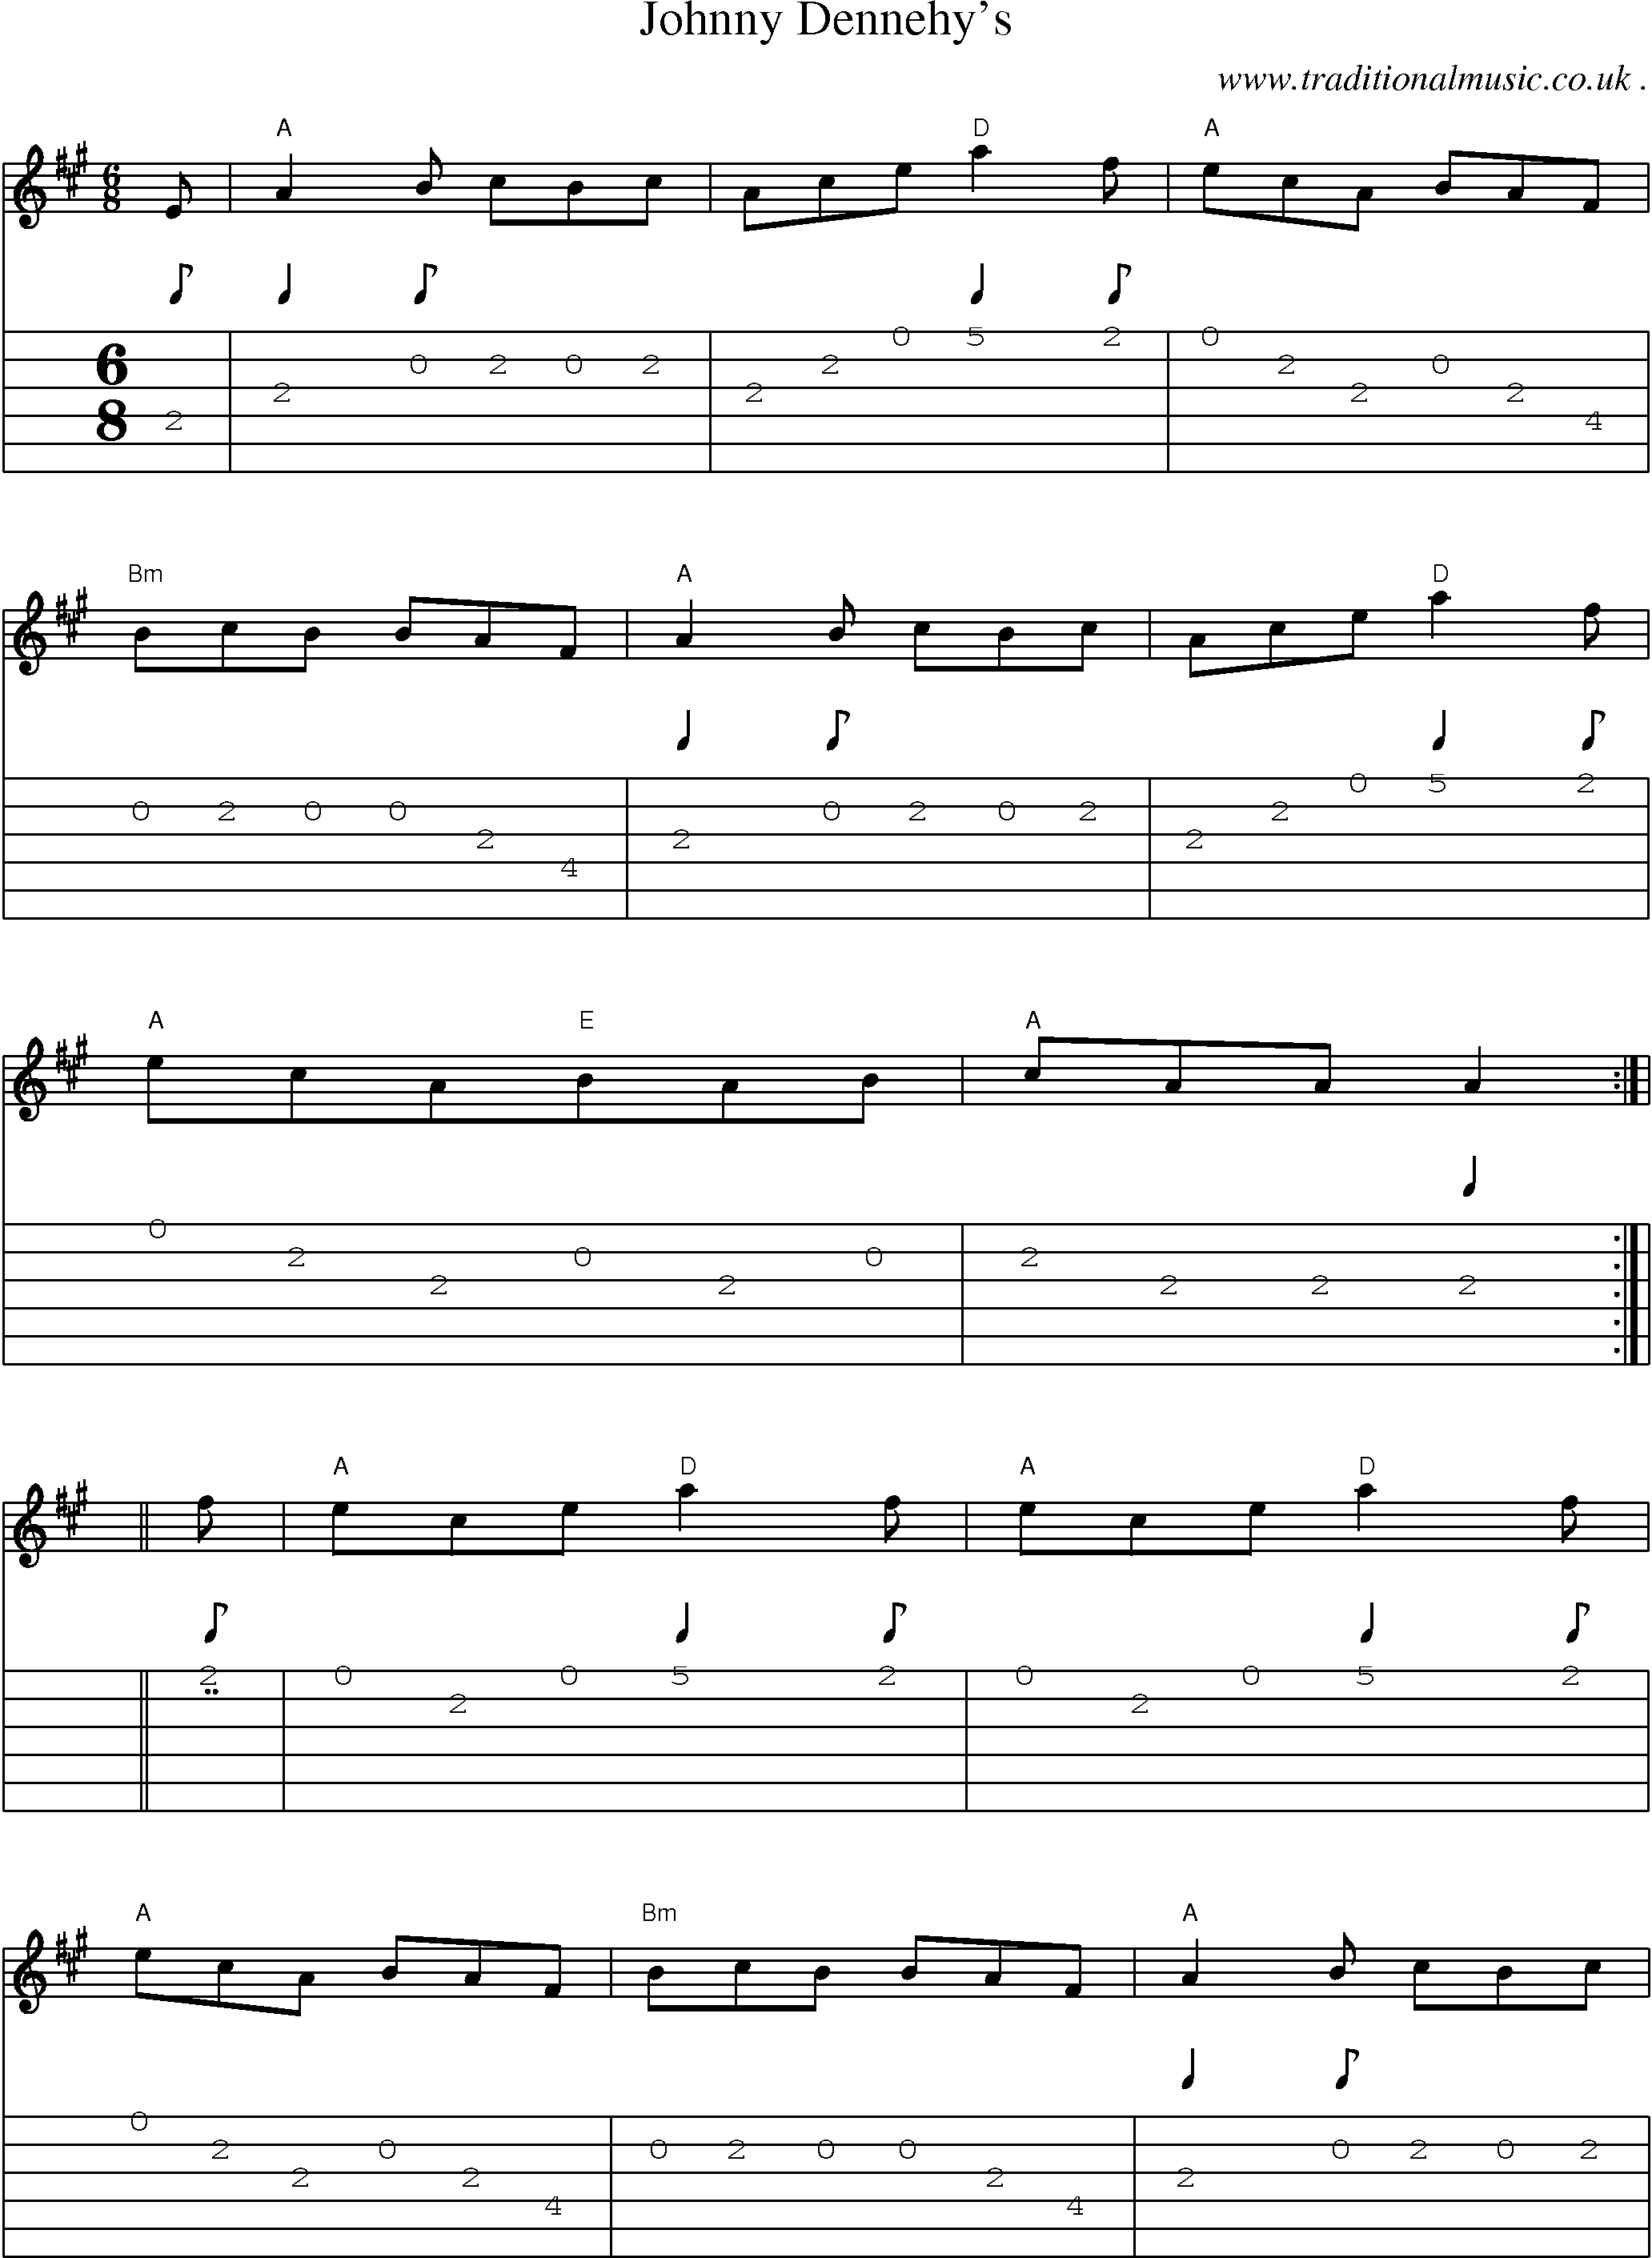 Sheet-Music and Guitar Tabs for Johnny Dennehys